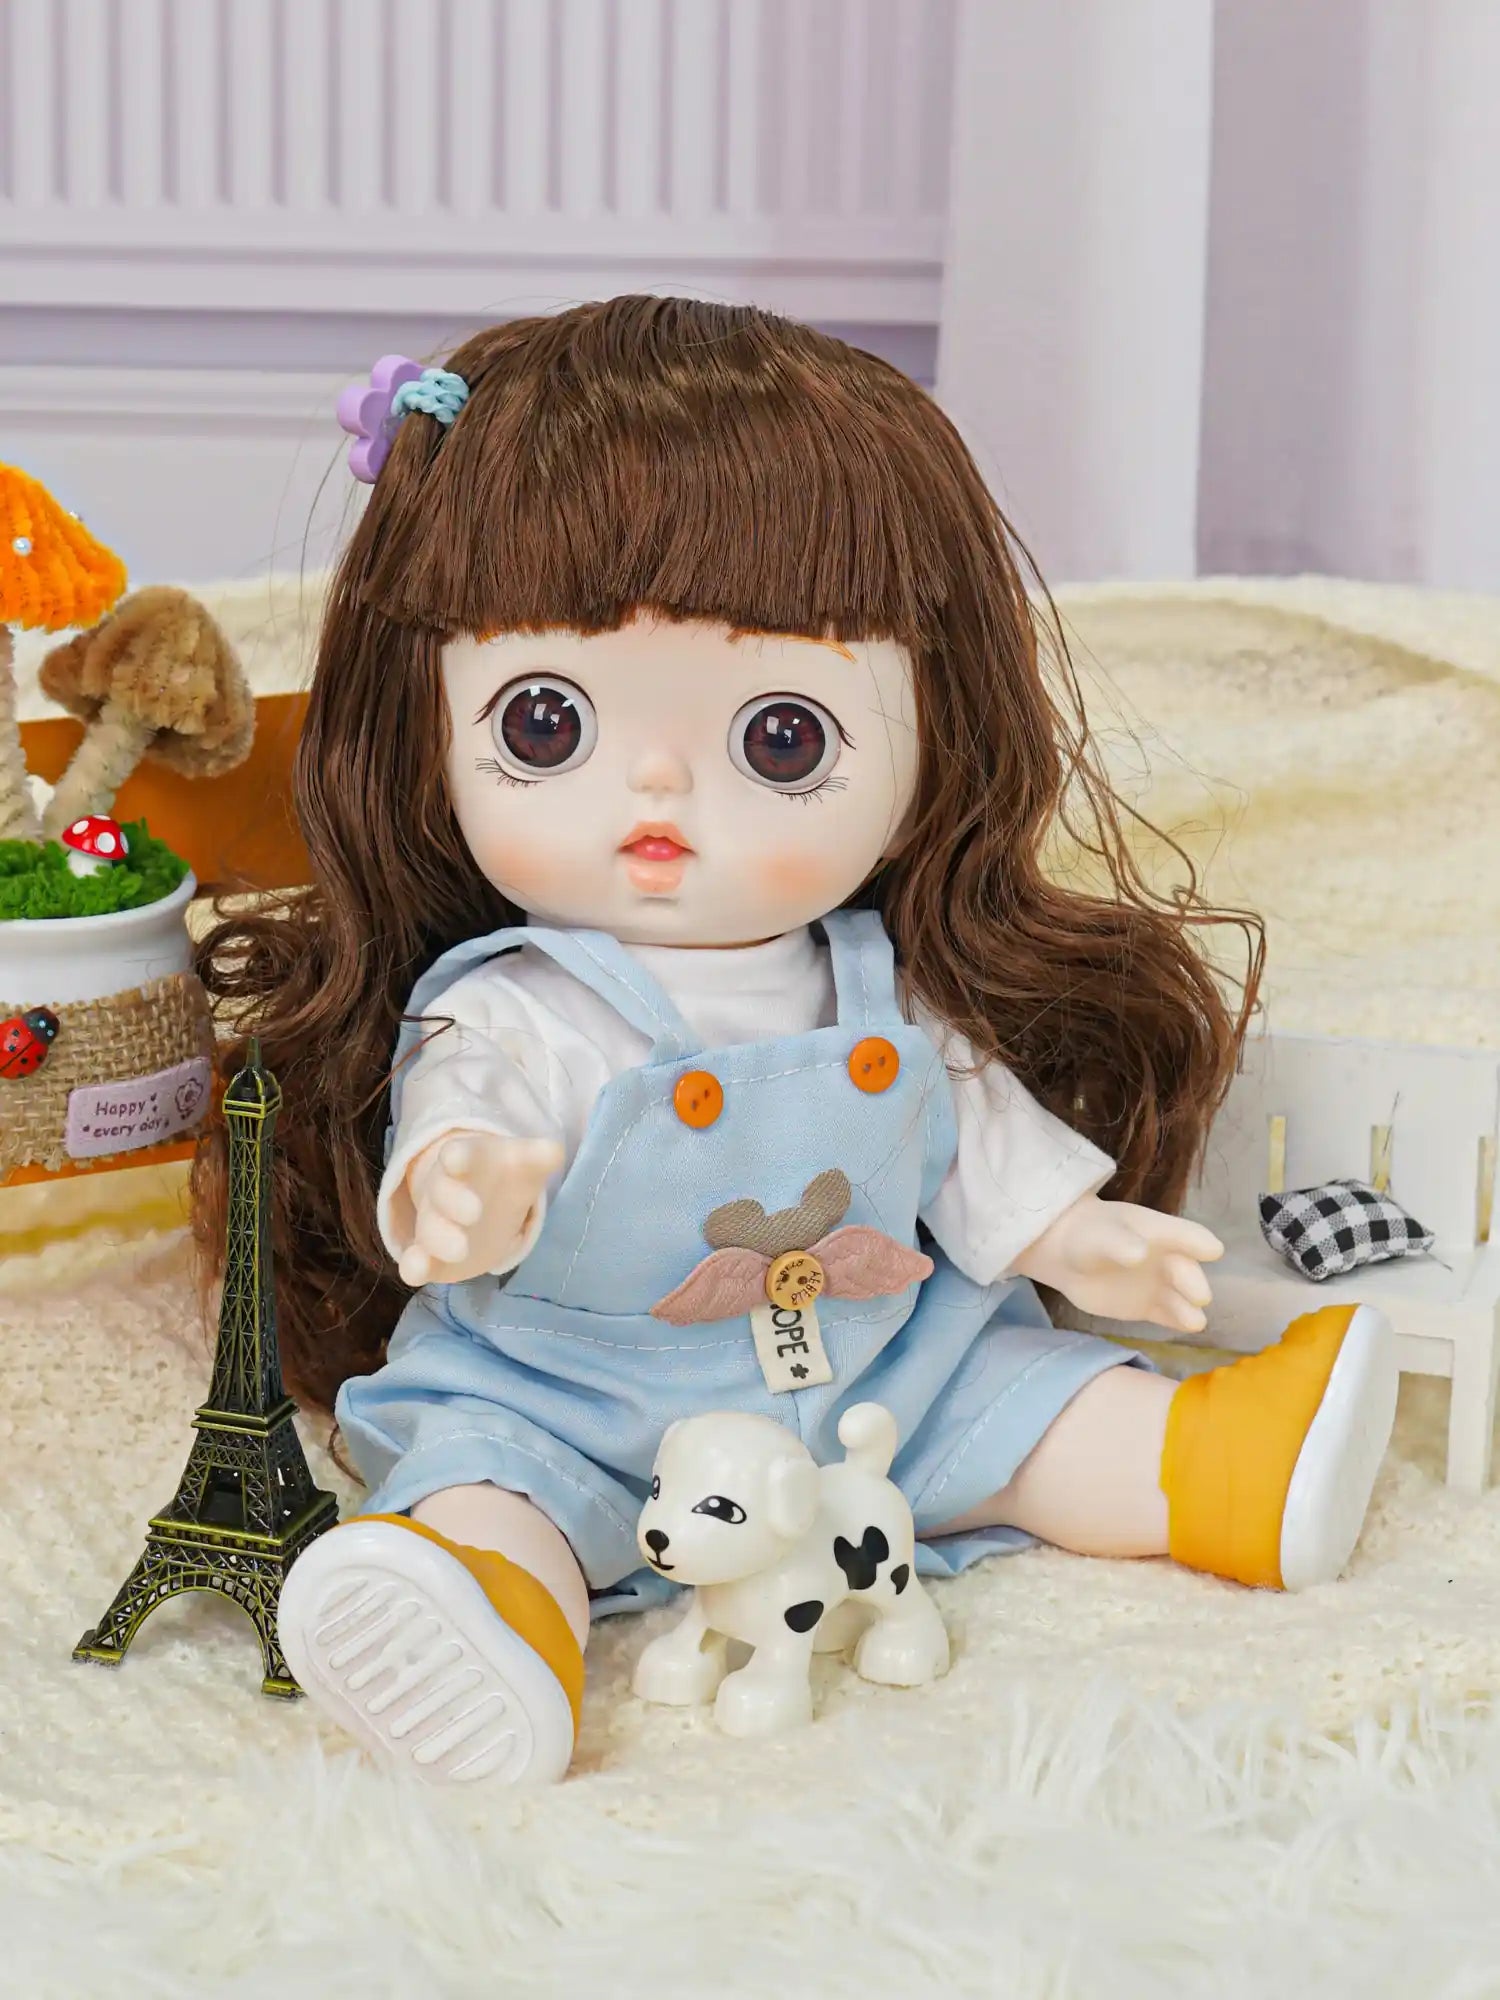 A doll with a curious expression and wavy hair, clad in a blue onesie, shares the frame with a model of the Eiffel Tower.